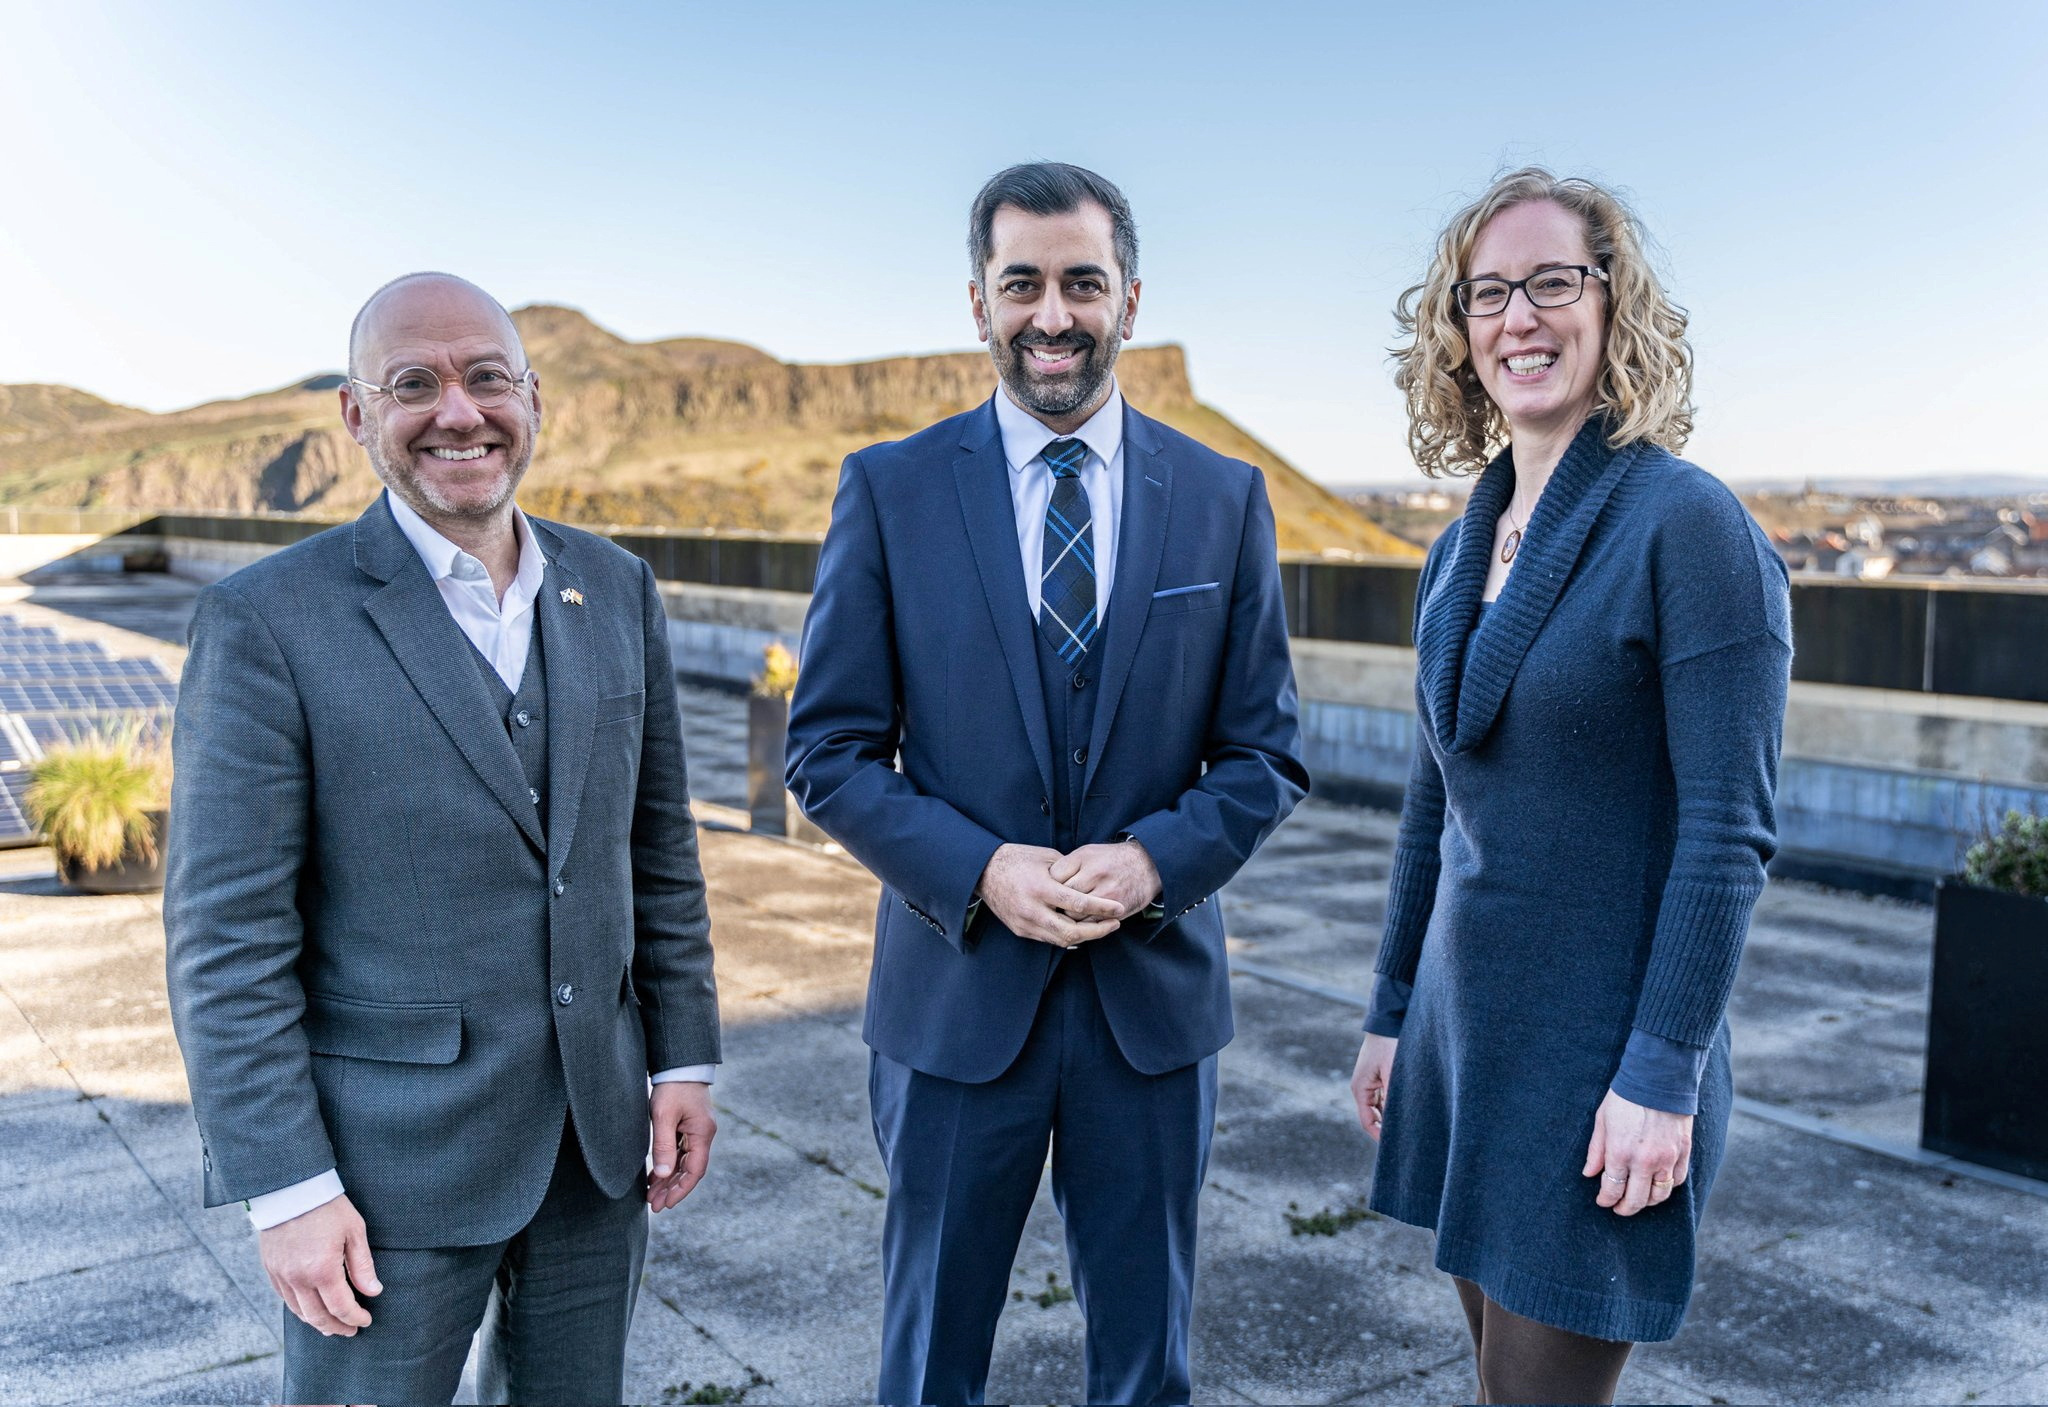 Scottish First Minister Yousaf poses with Greens co-leaders Harvie and Slater in Edinburgh